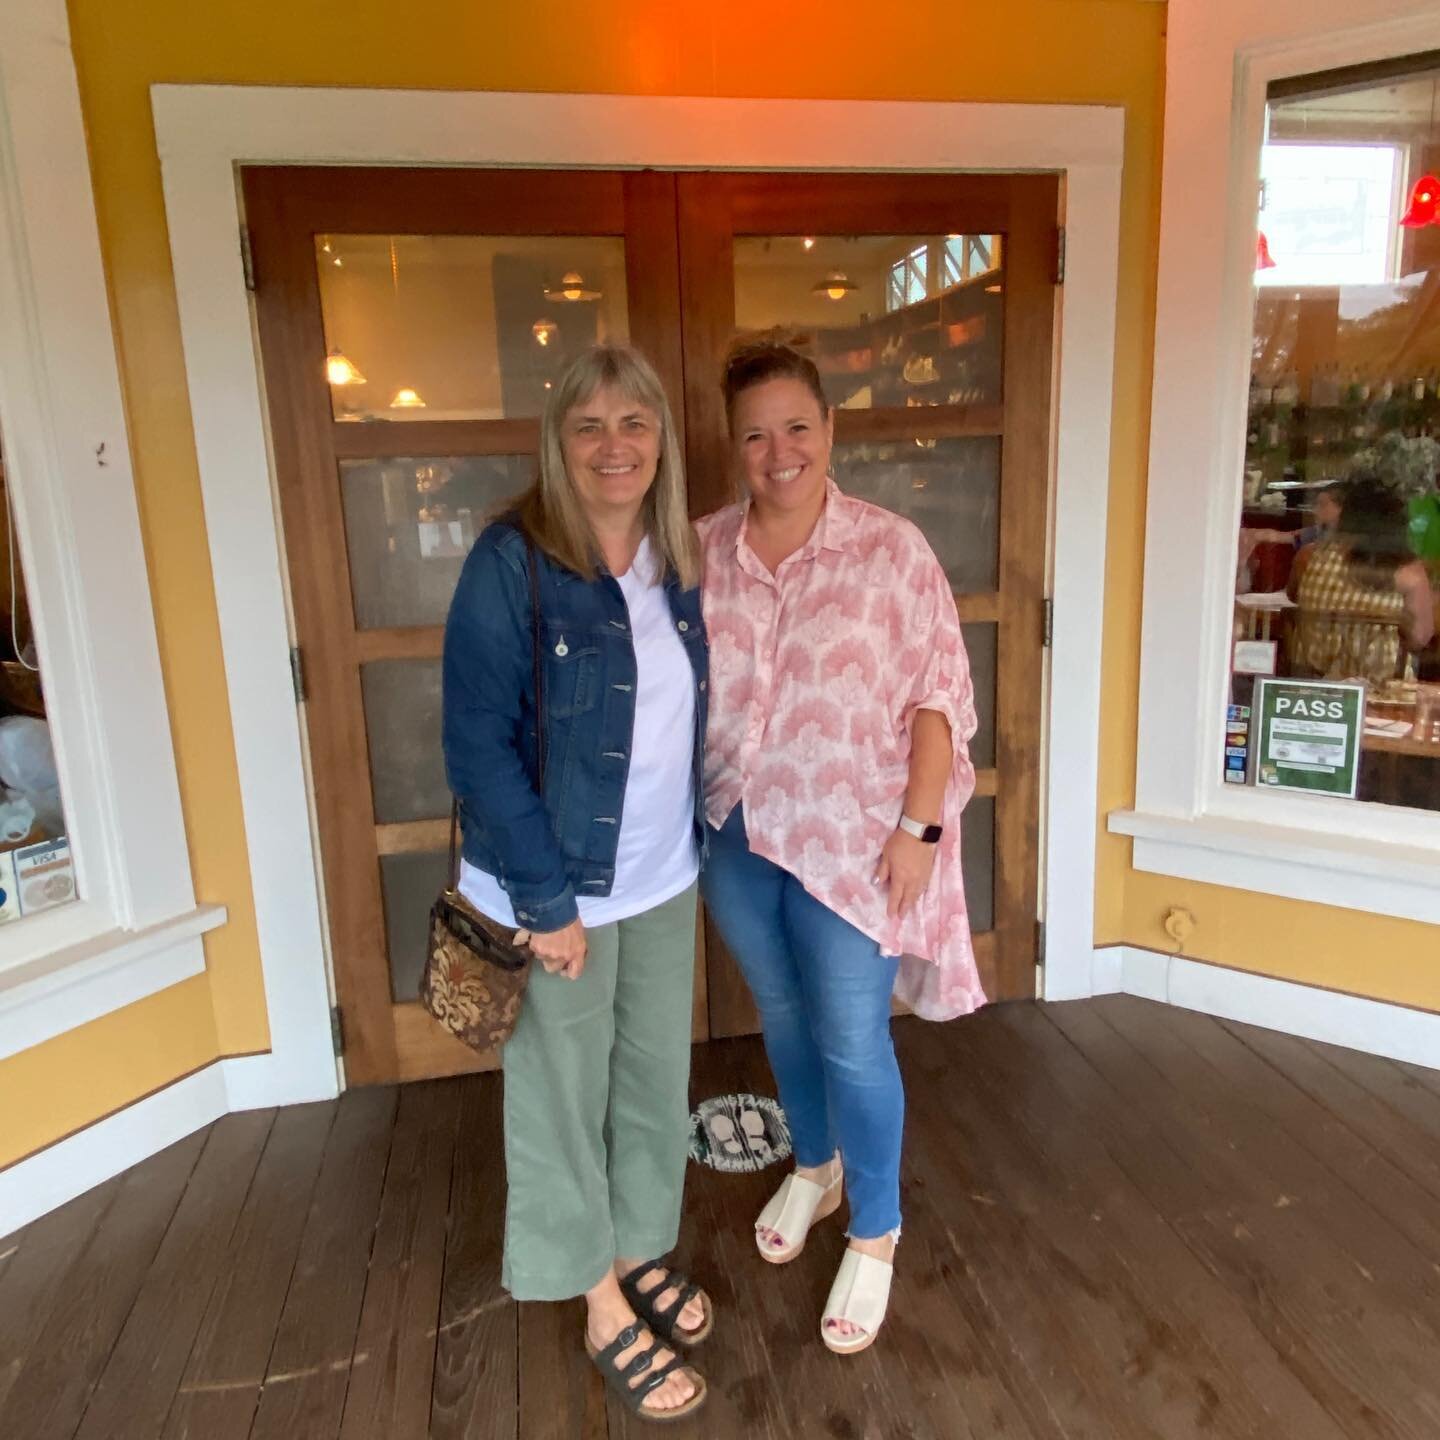 Wonderful celebration of my friend Andrea&rsquo;s birthday in this amazing restaurant The General Store here on Maui, filled with local paintings and decor.